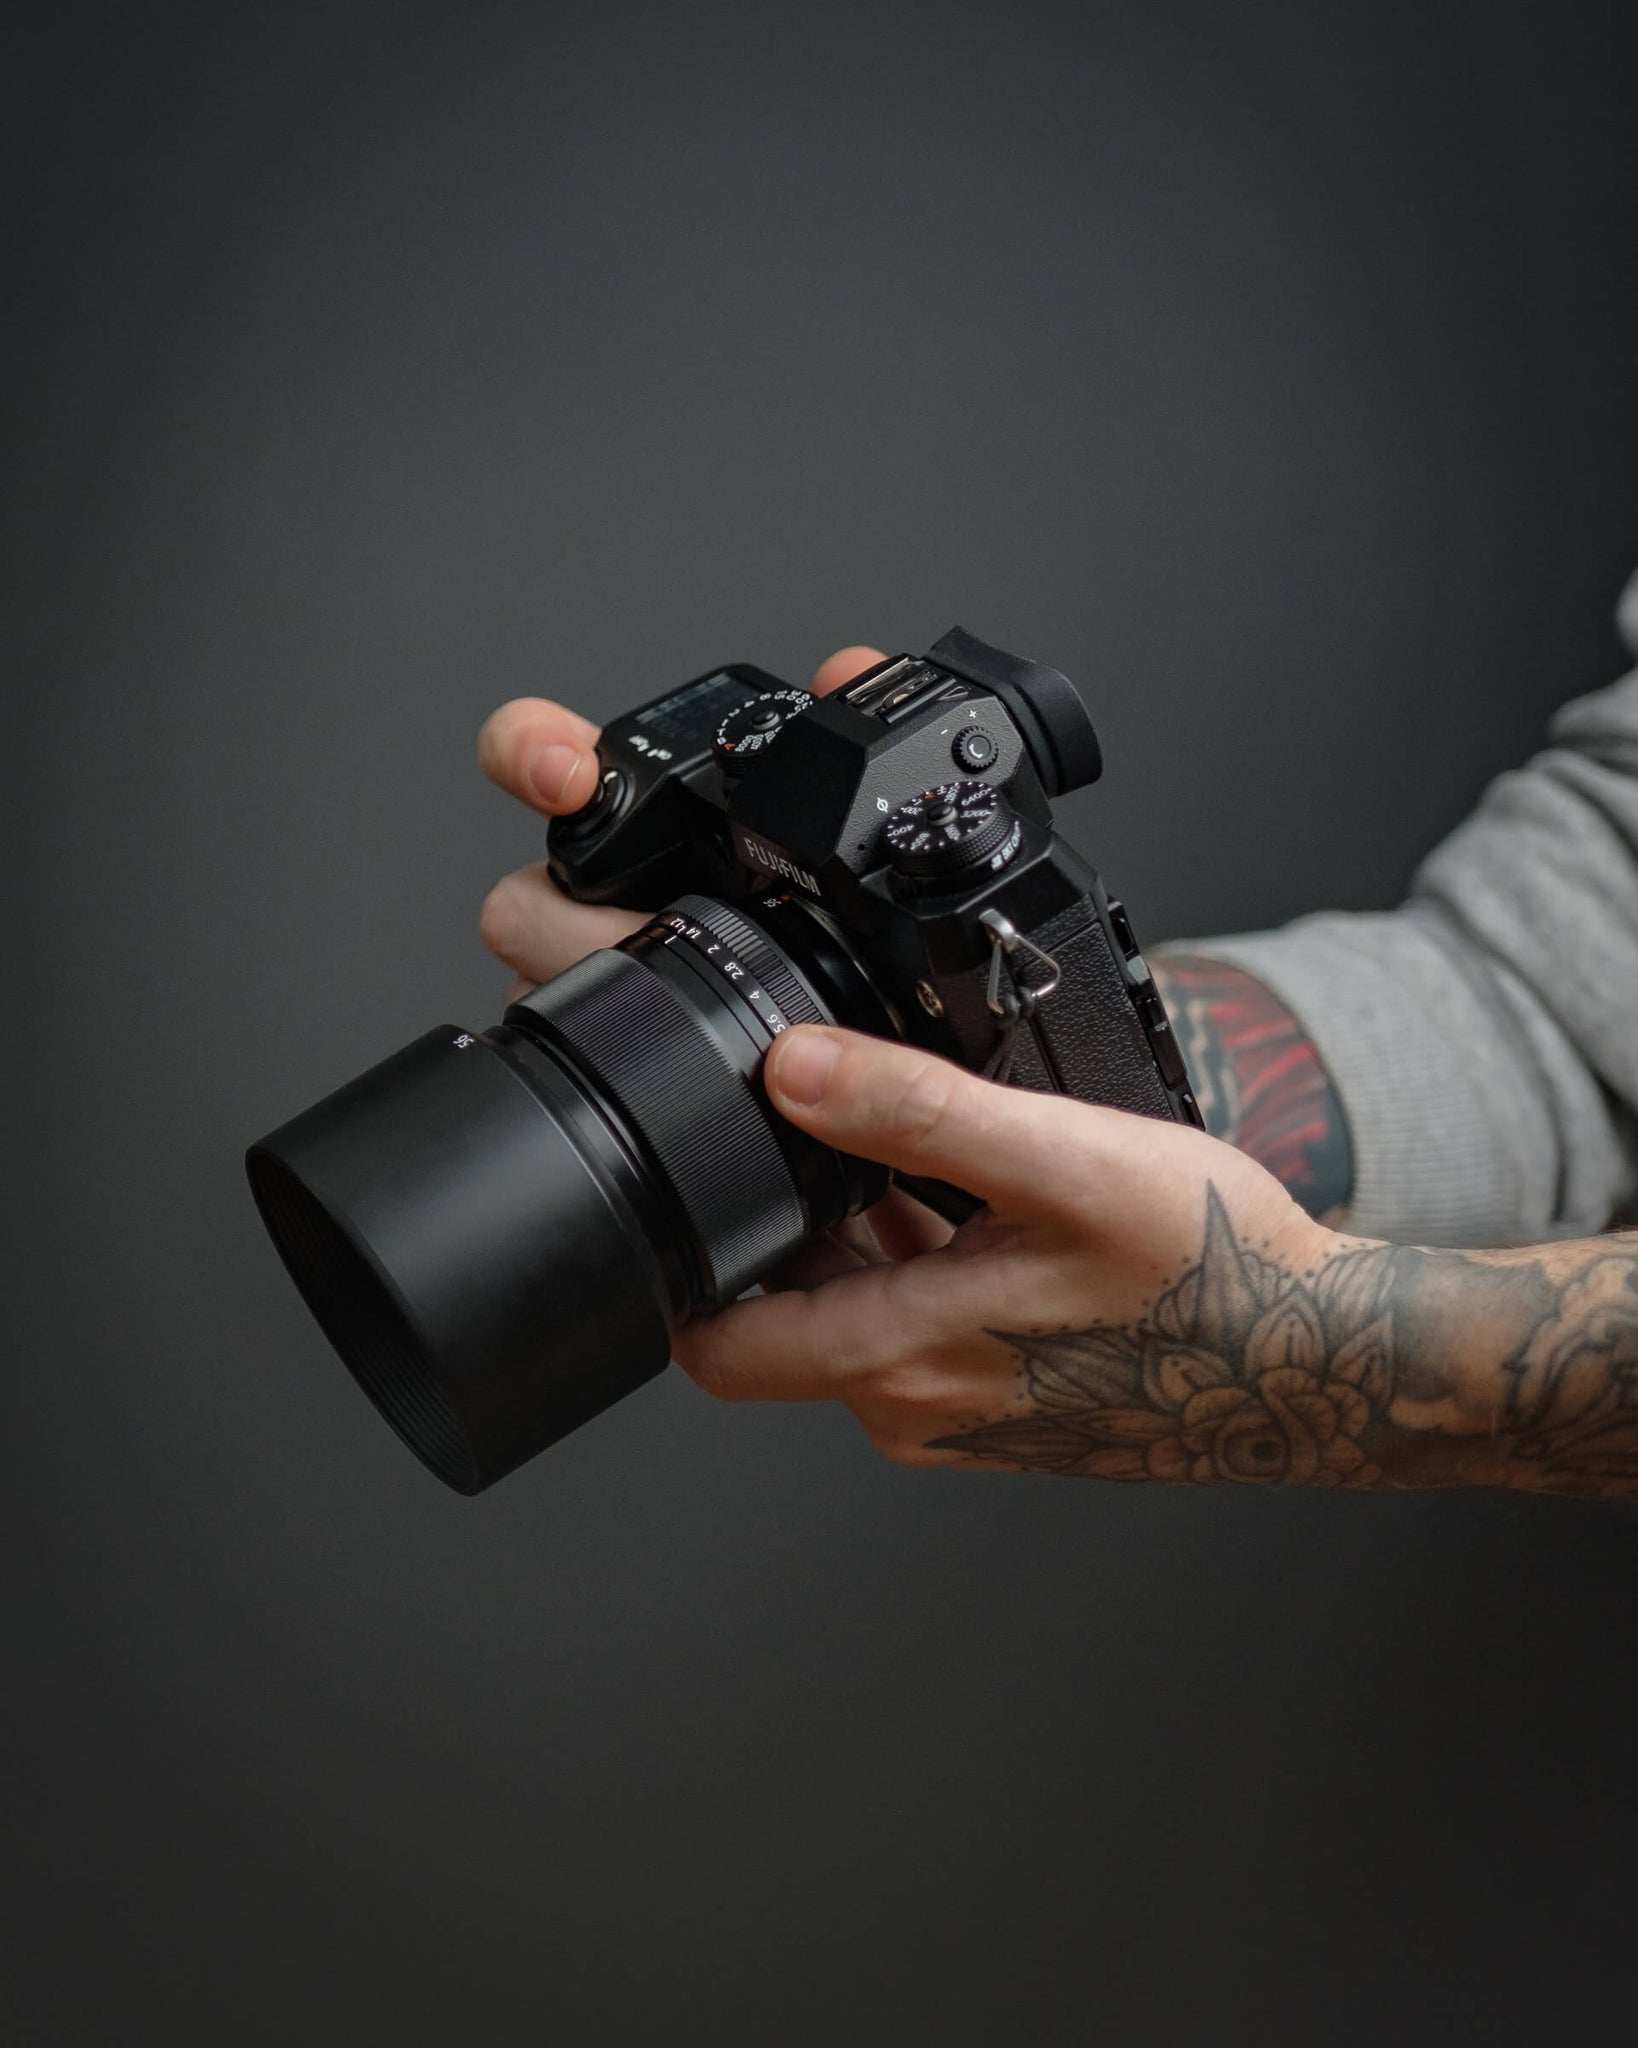 What Are Mirrorless Cameras And How Do They Work?